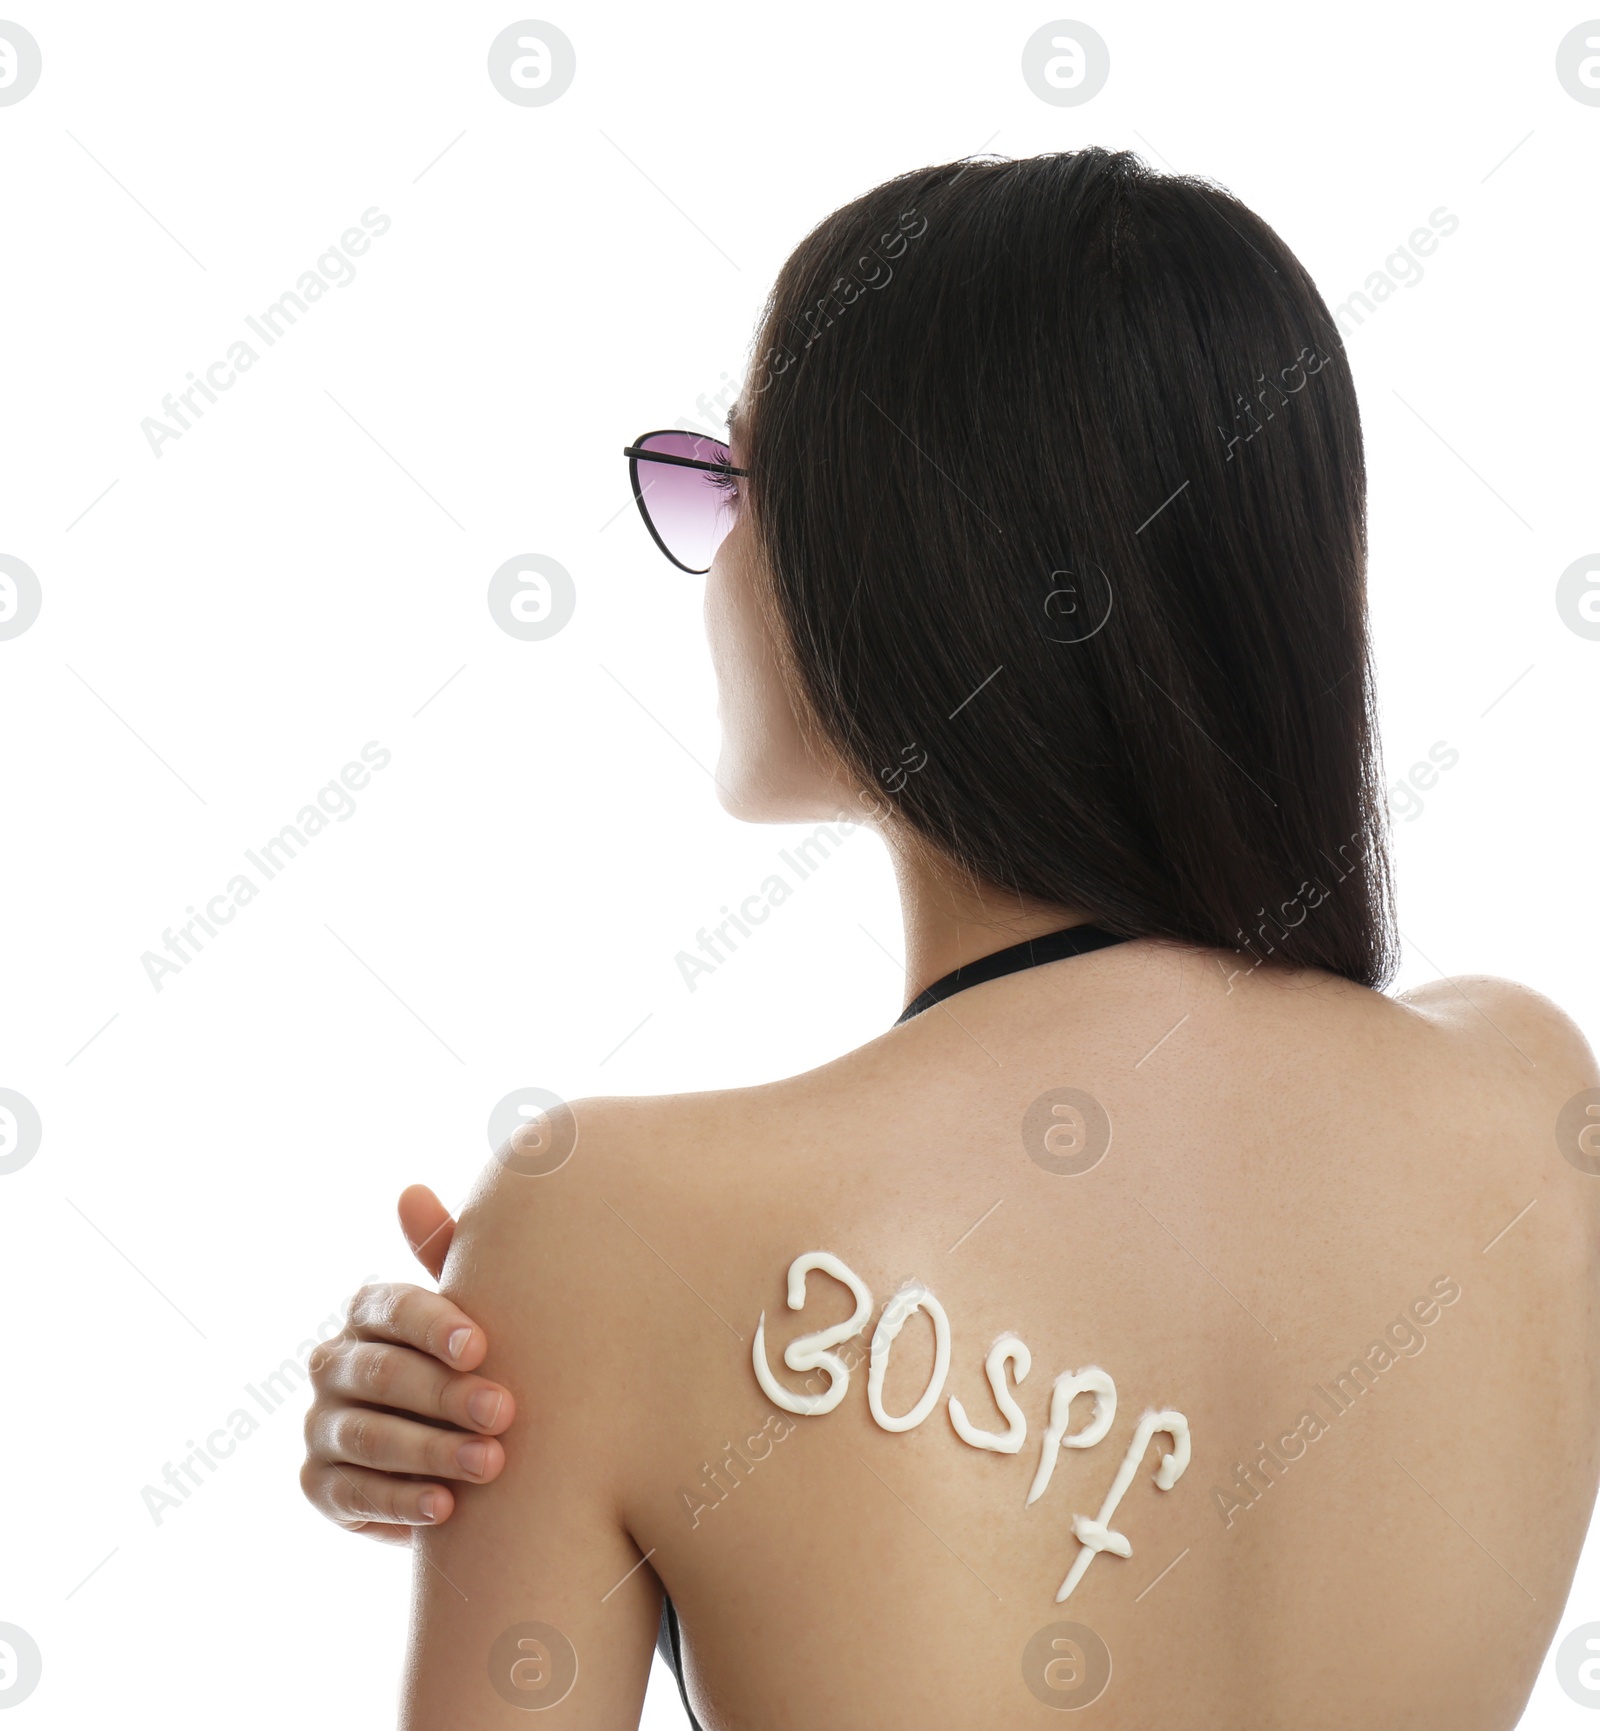 Photo of Text 30 SPF written with sun protection cream on woman's back against white background